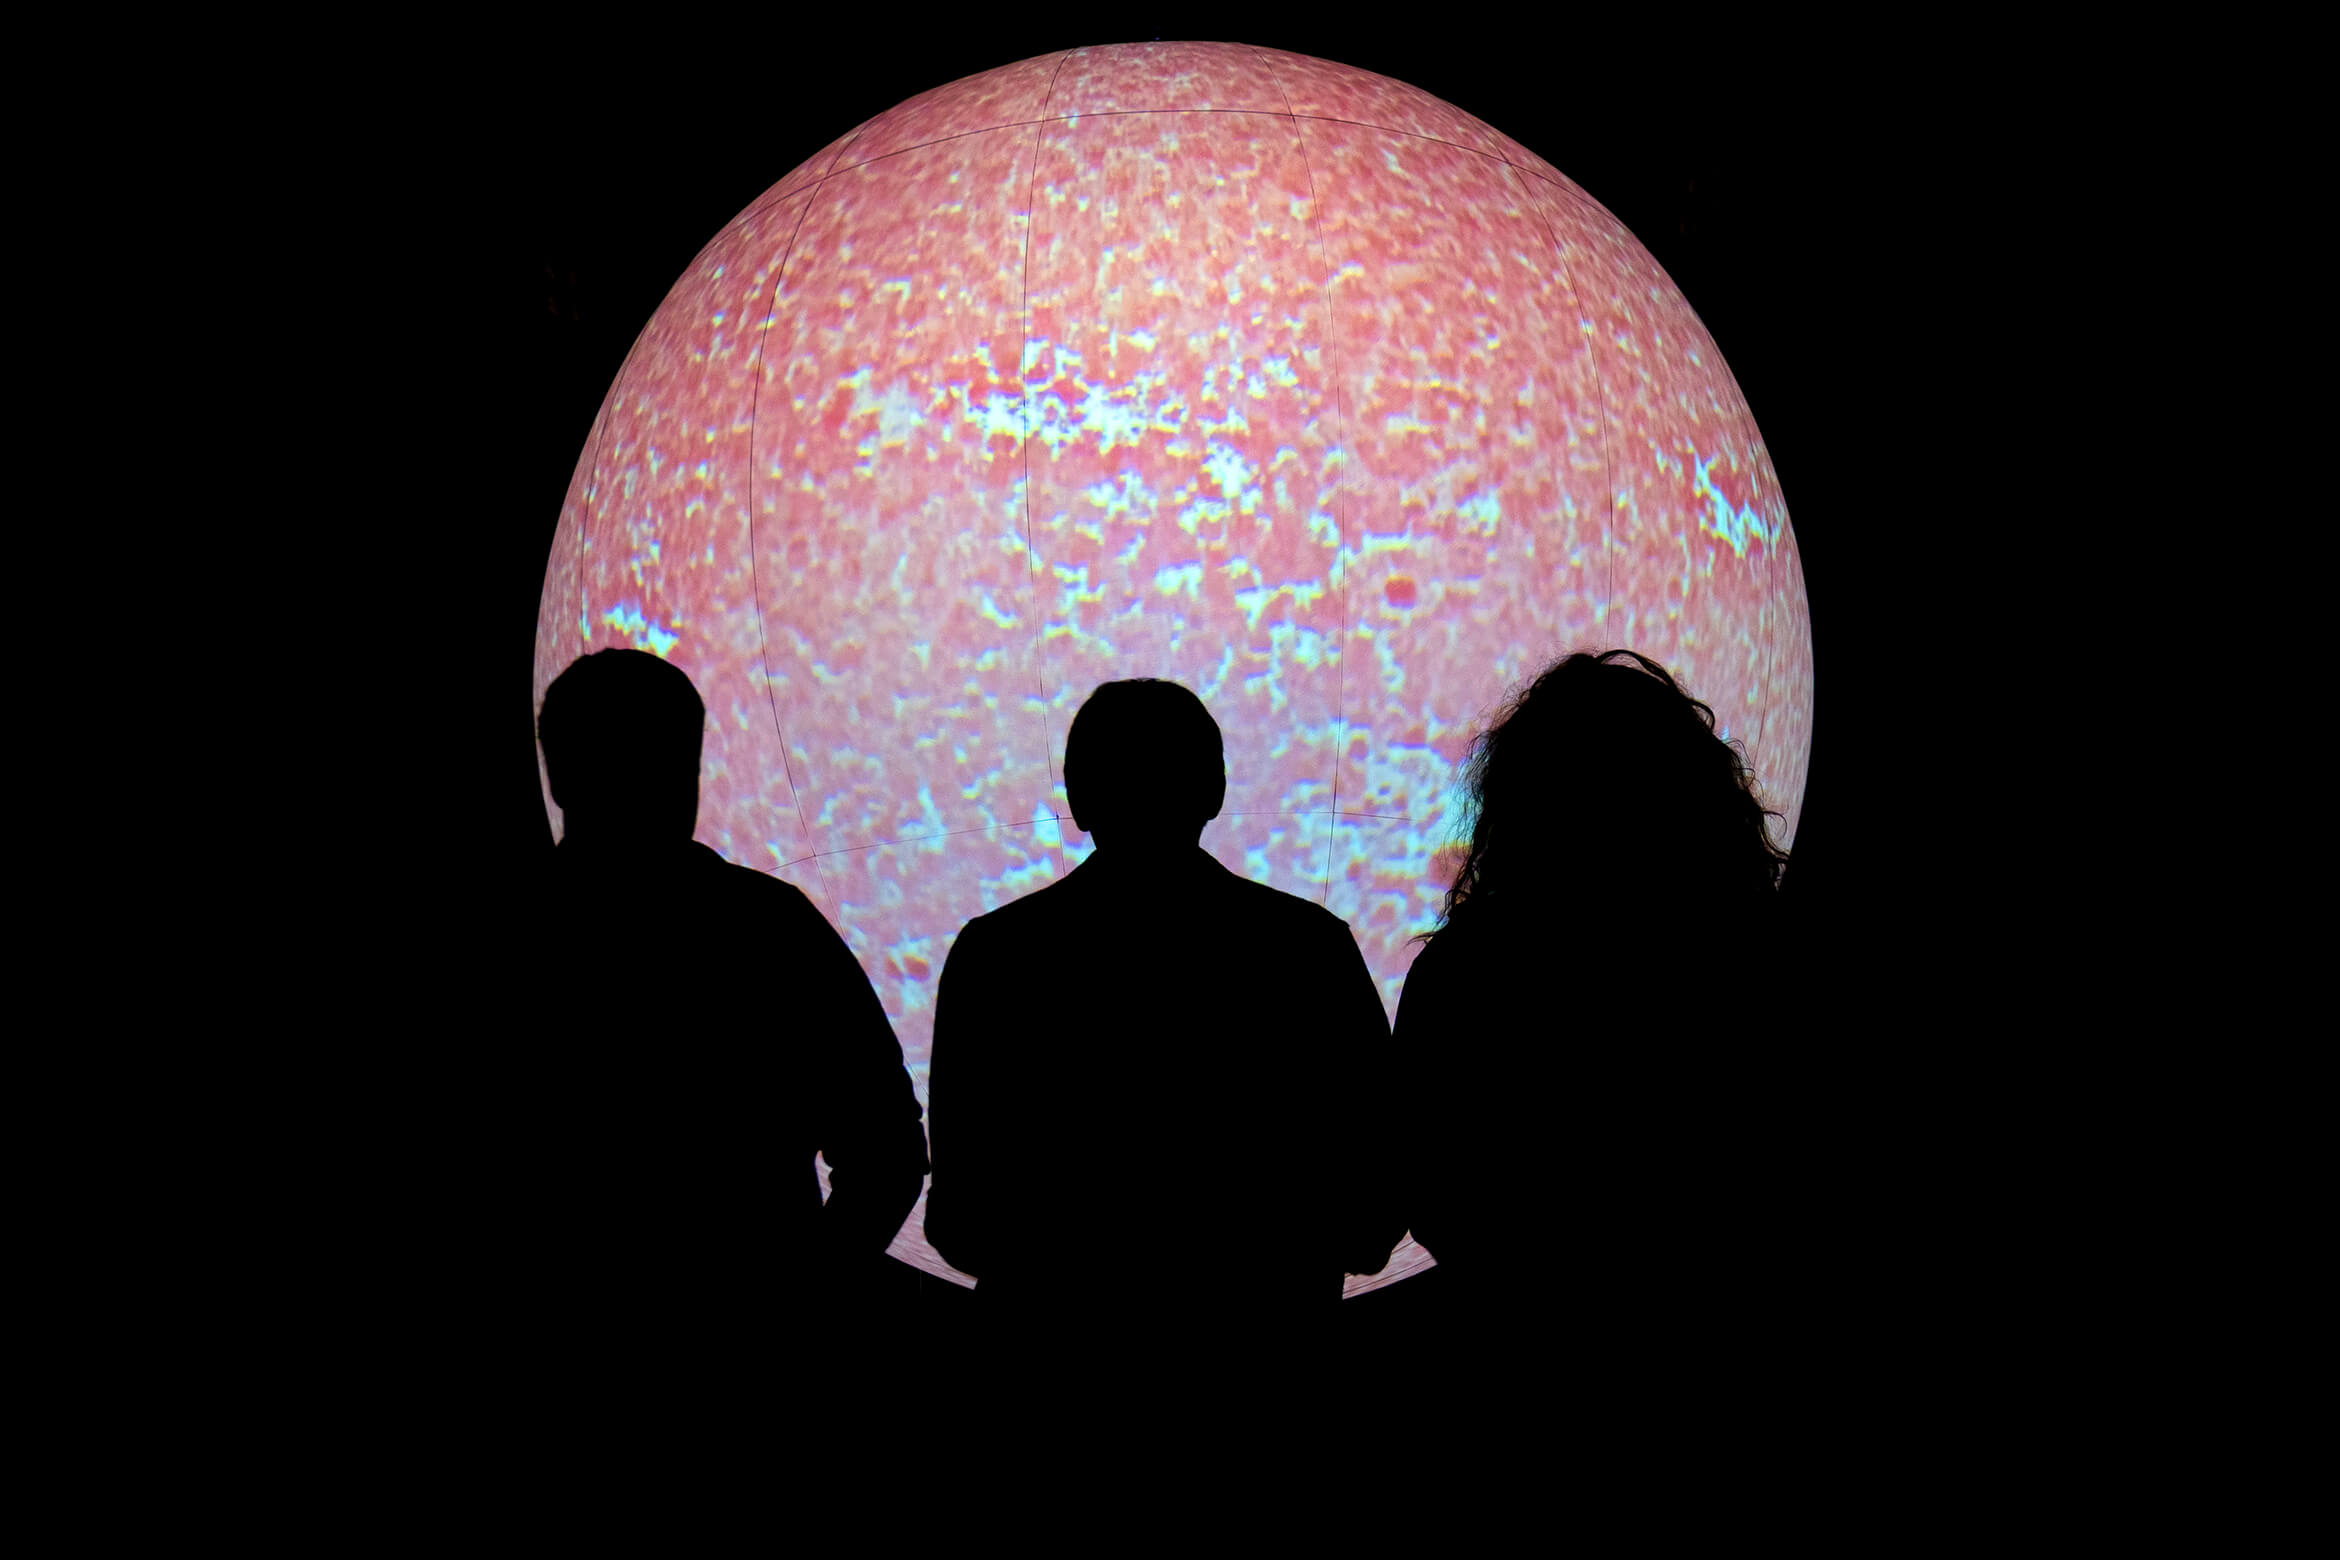 Three people looking at SUN during a pink phase